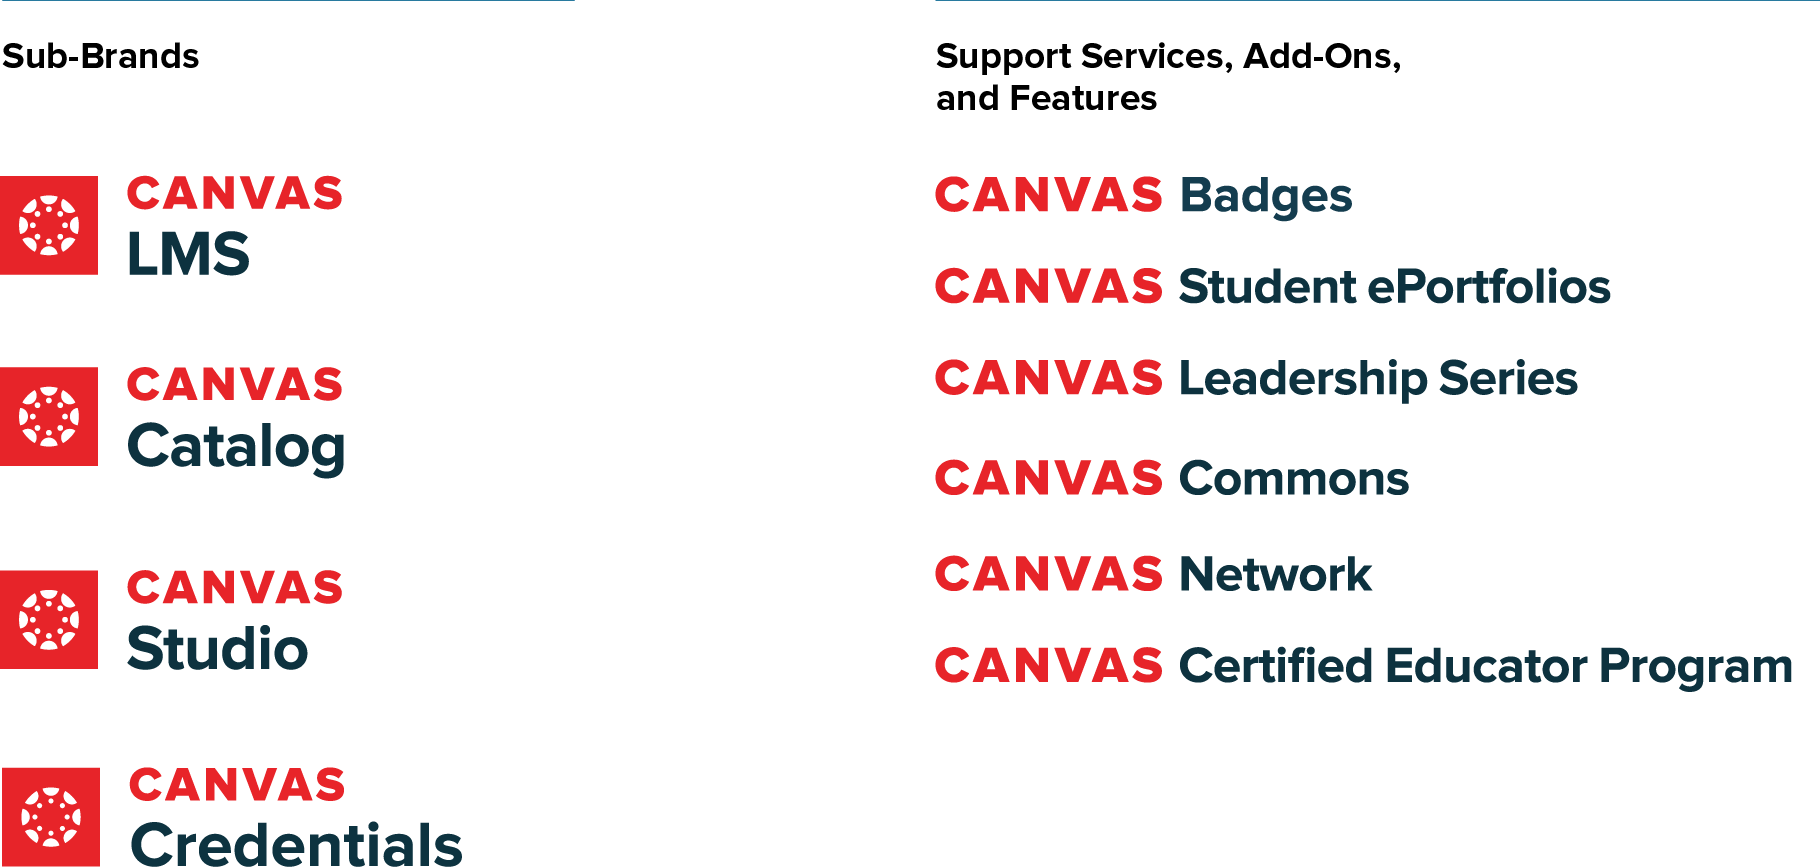 Canvas Sub-brands and services